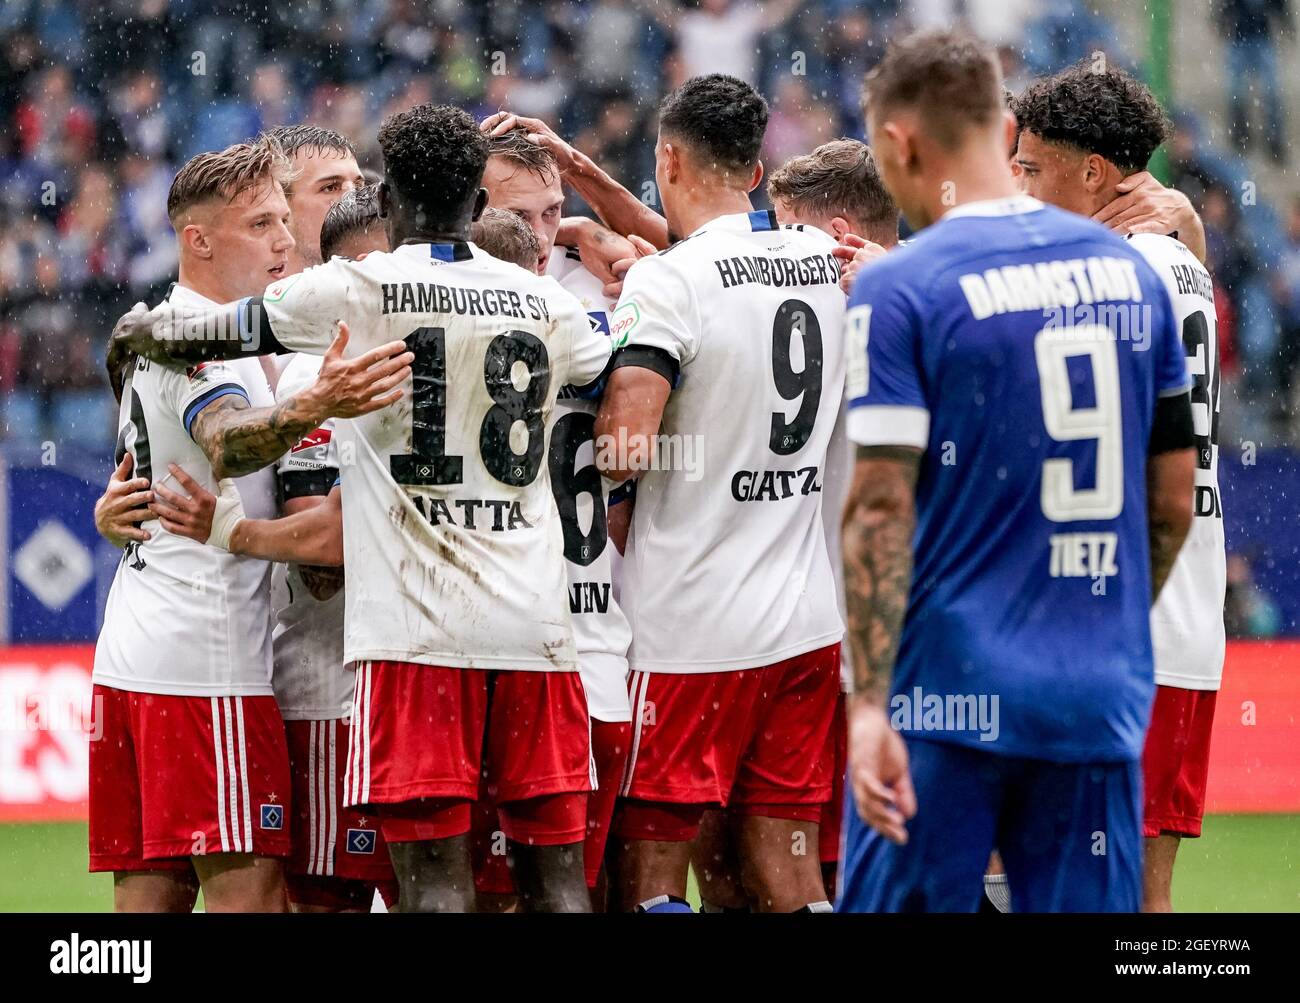 Hamburg, Germany. 22nd Aug, 2021. Football: 2. Bundesliga, Hamburger SV - Darmstadt 98, Matchday 4 at Volksparkstadion. Hamburg's players celebrate Hamburg's Sebastian Schonlau (centre) for scoring the goal to make it 1:1. Credit: Axel Heimken/dpa - IMPORTANT NOTE: In accordance with the regulations of the DFL Deutsche Fußball Liga and/or the DFB Deutscher Fußball-Bund, it is prohibited to use or have used photographs taken in the stadium and/or of the match in the form of sequence pictures and/or video-like photo series./dpa/Alamy Live News Stock Photo